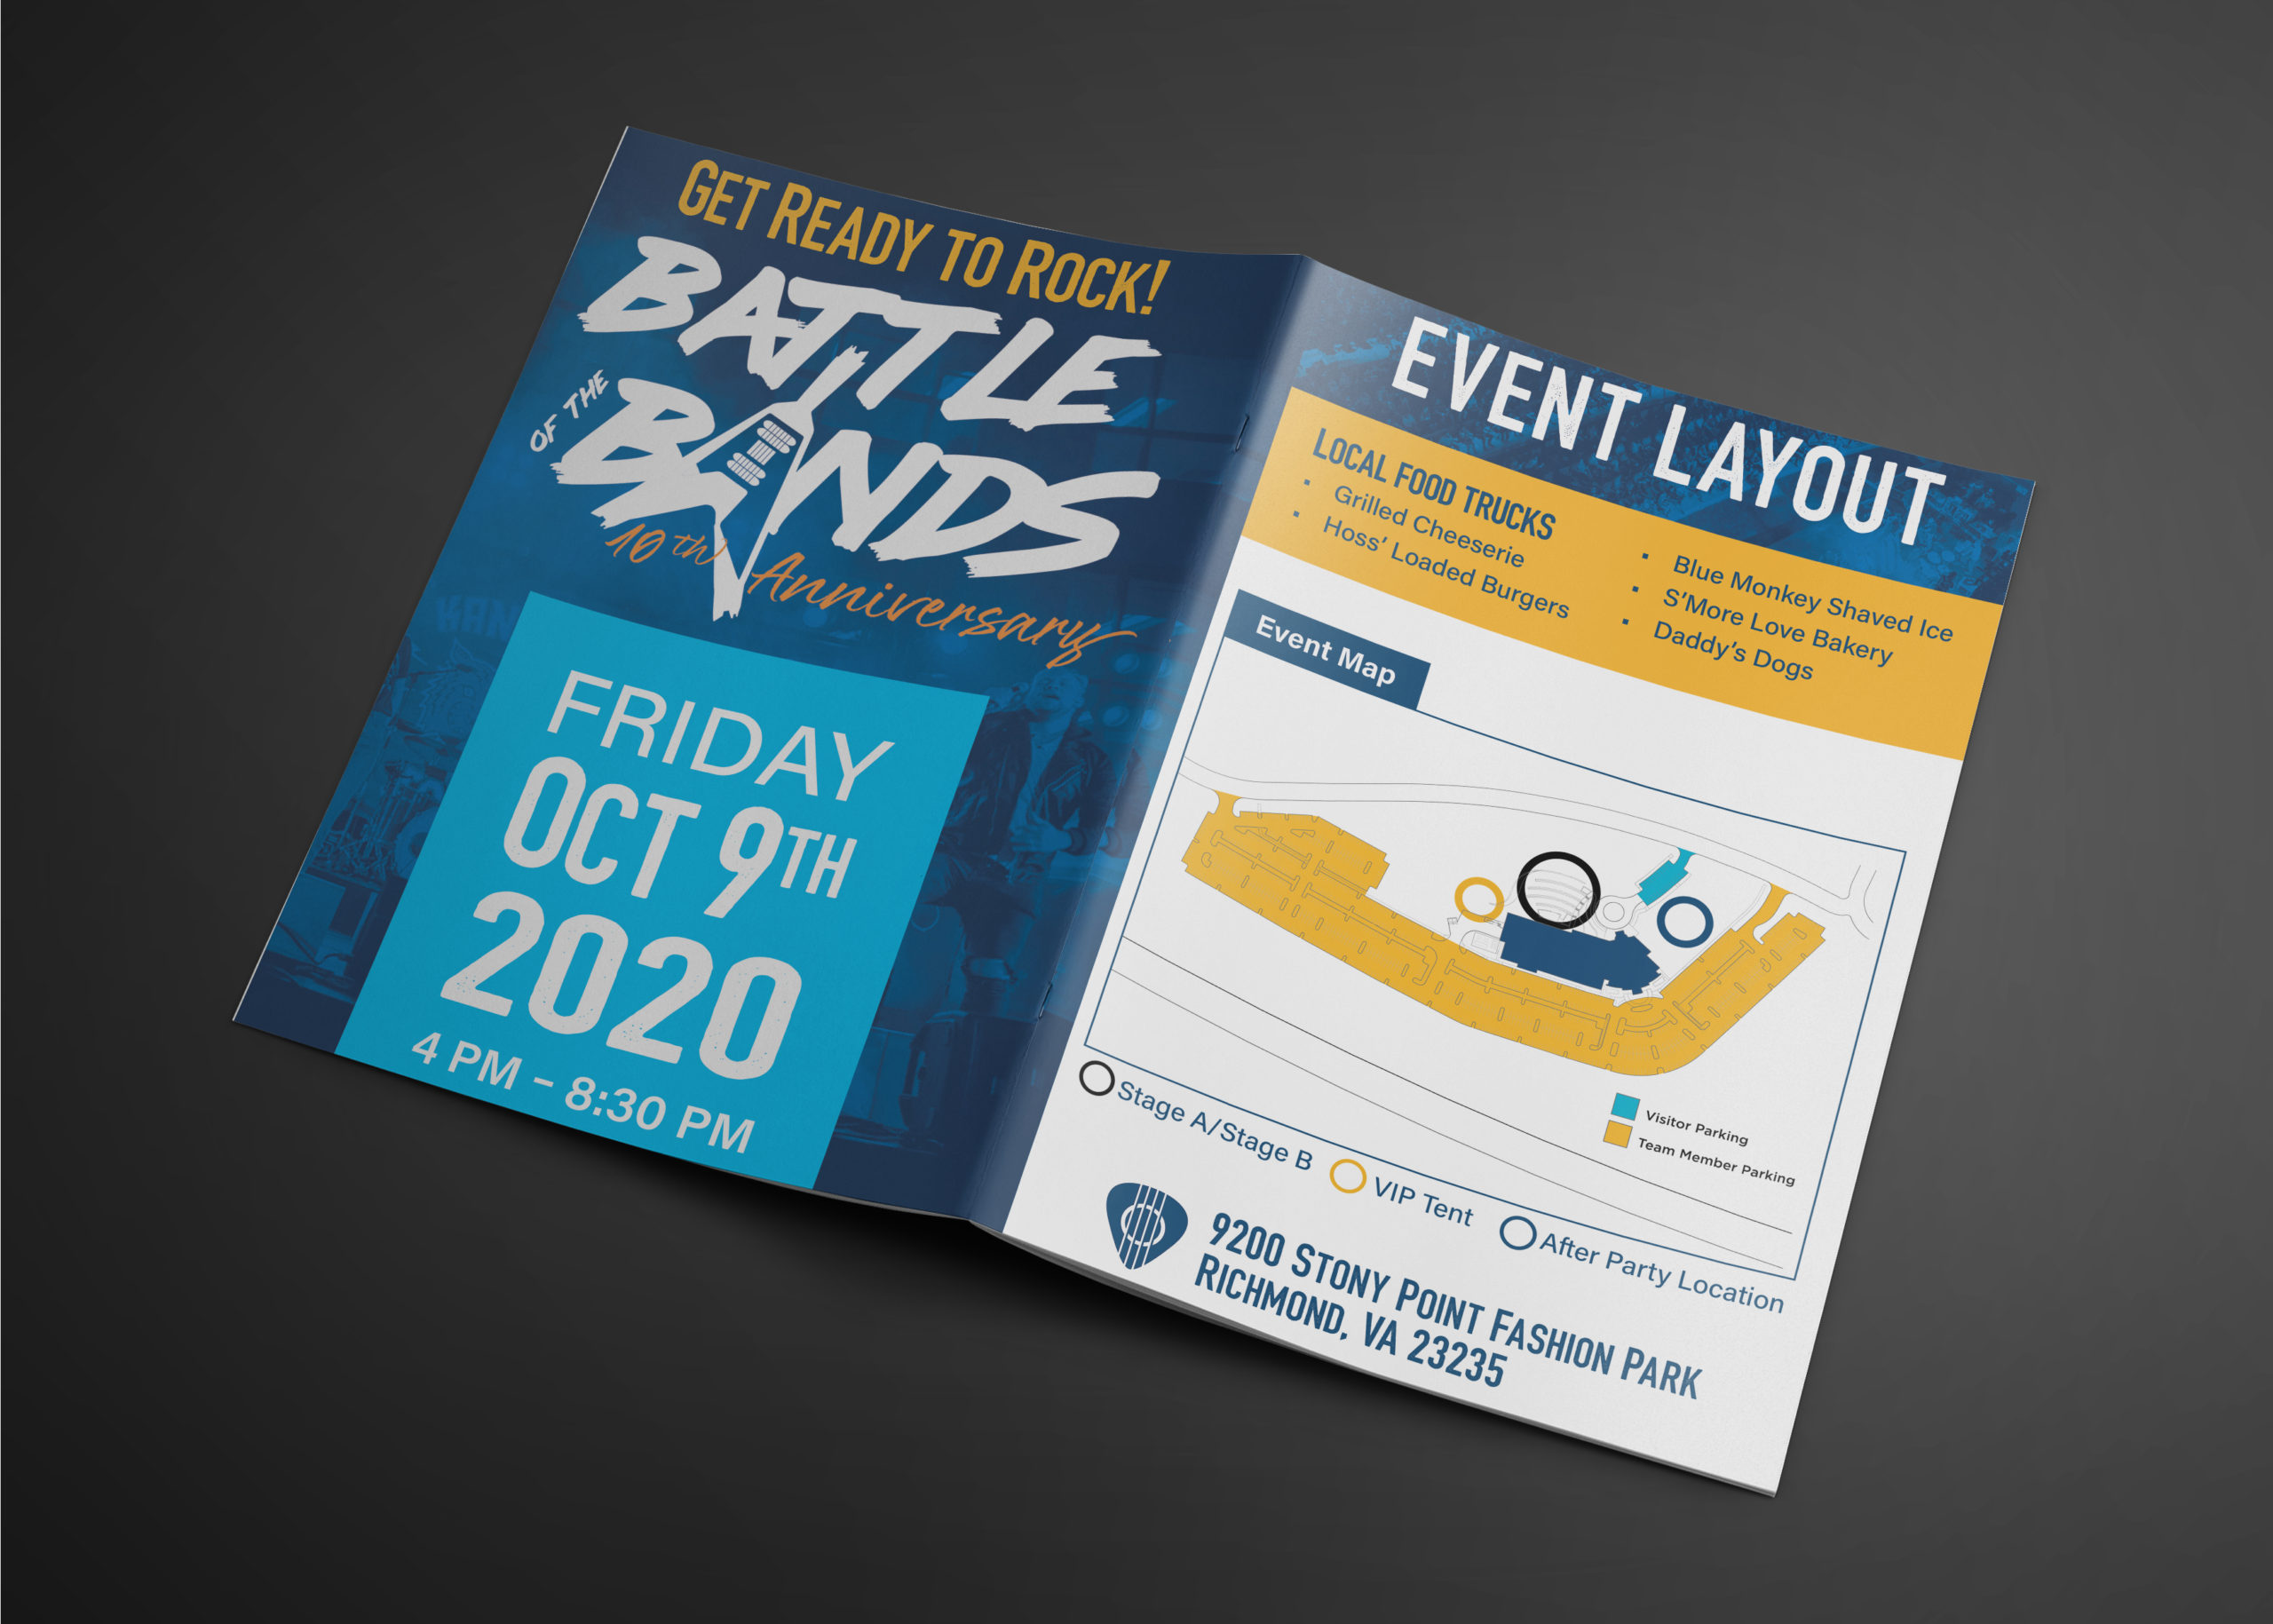 Battle of the Bands Event Guide Cover